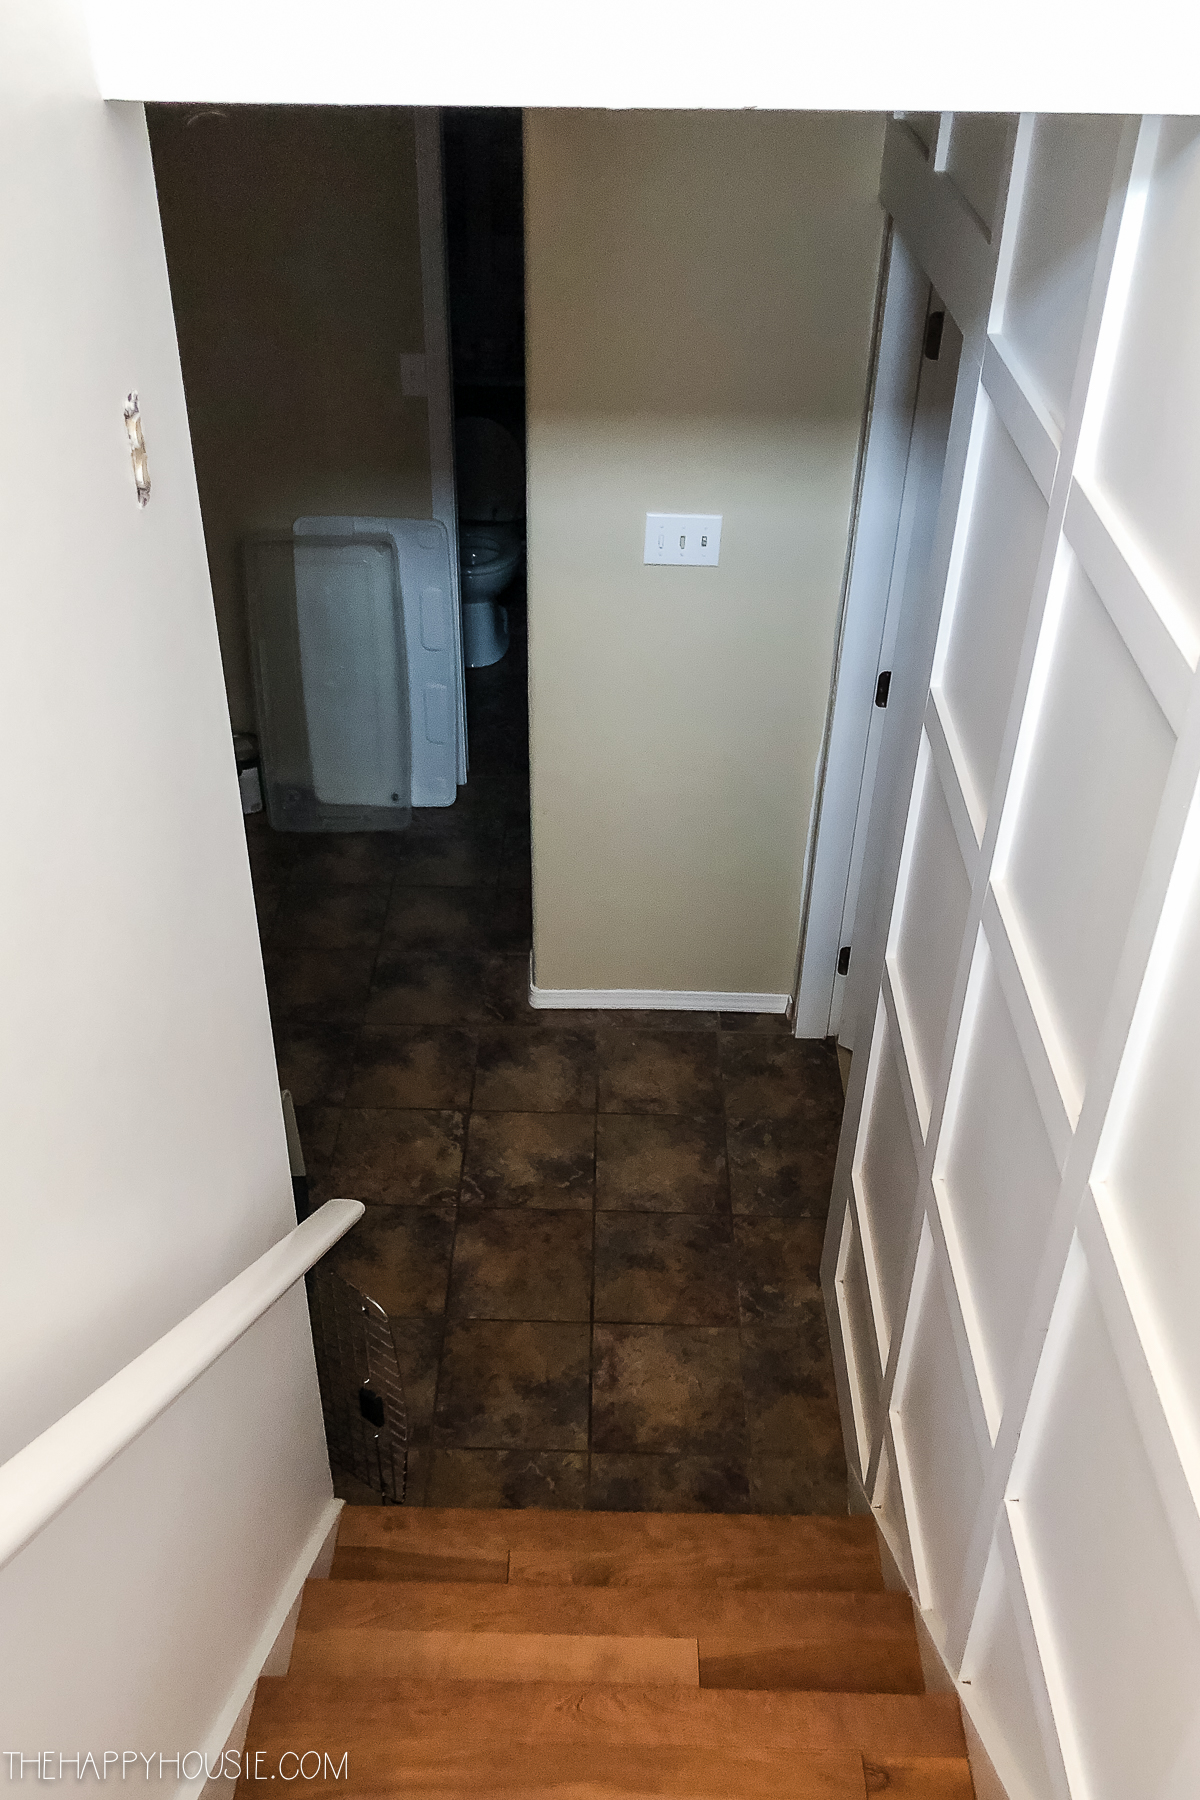 Install Vinyl Plank Over Tile Floors, Can You Put A Floating Wood Floor Over Ceramic Tile